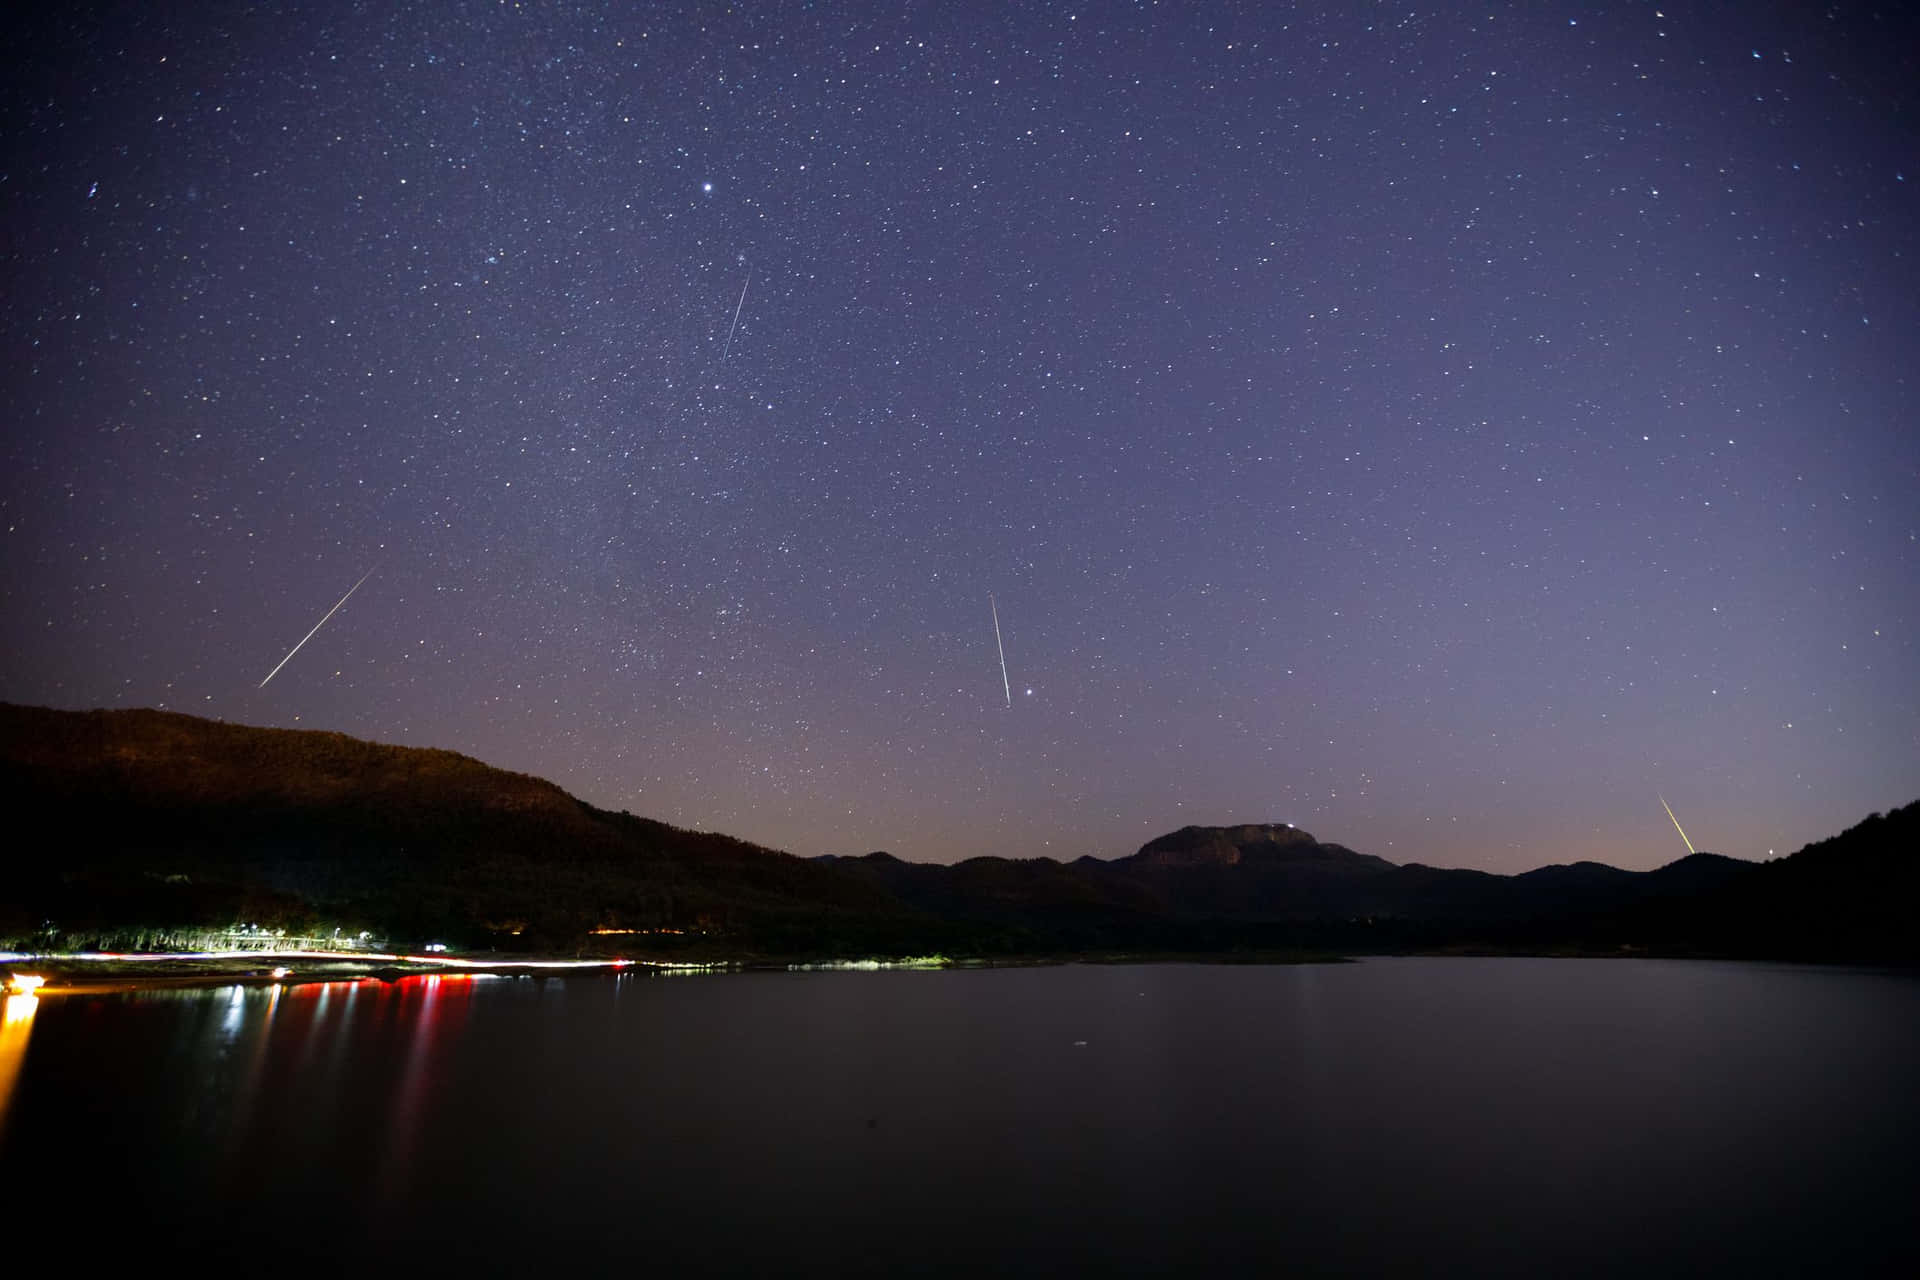 A blazing meteor streaks across the night sky | Description: A brilliant, colorful meteor streaks across a starry night sky. Its fiery tail trails behind it, creating a dazzling spectacle of light. | Keywords: Meteor, Celestial, Space, Stardust, Astronomy, Night Sky